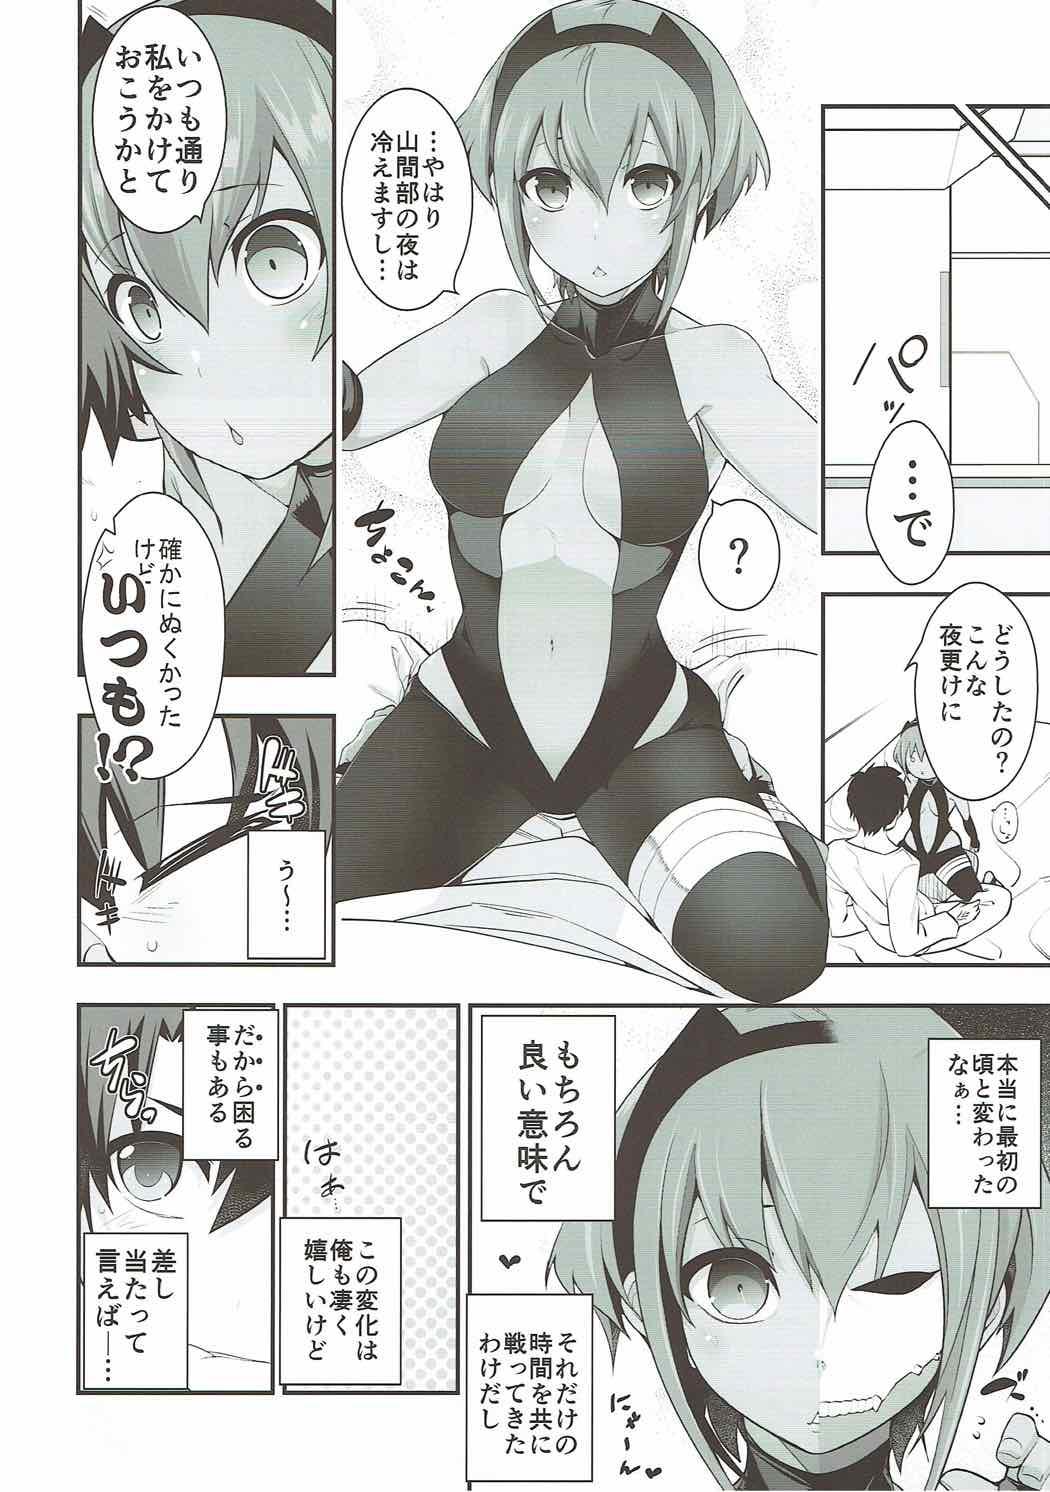 Doggy Natsuita - Fate grand order Lingerie - Page 5